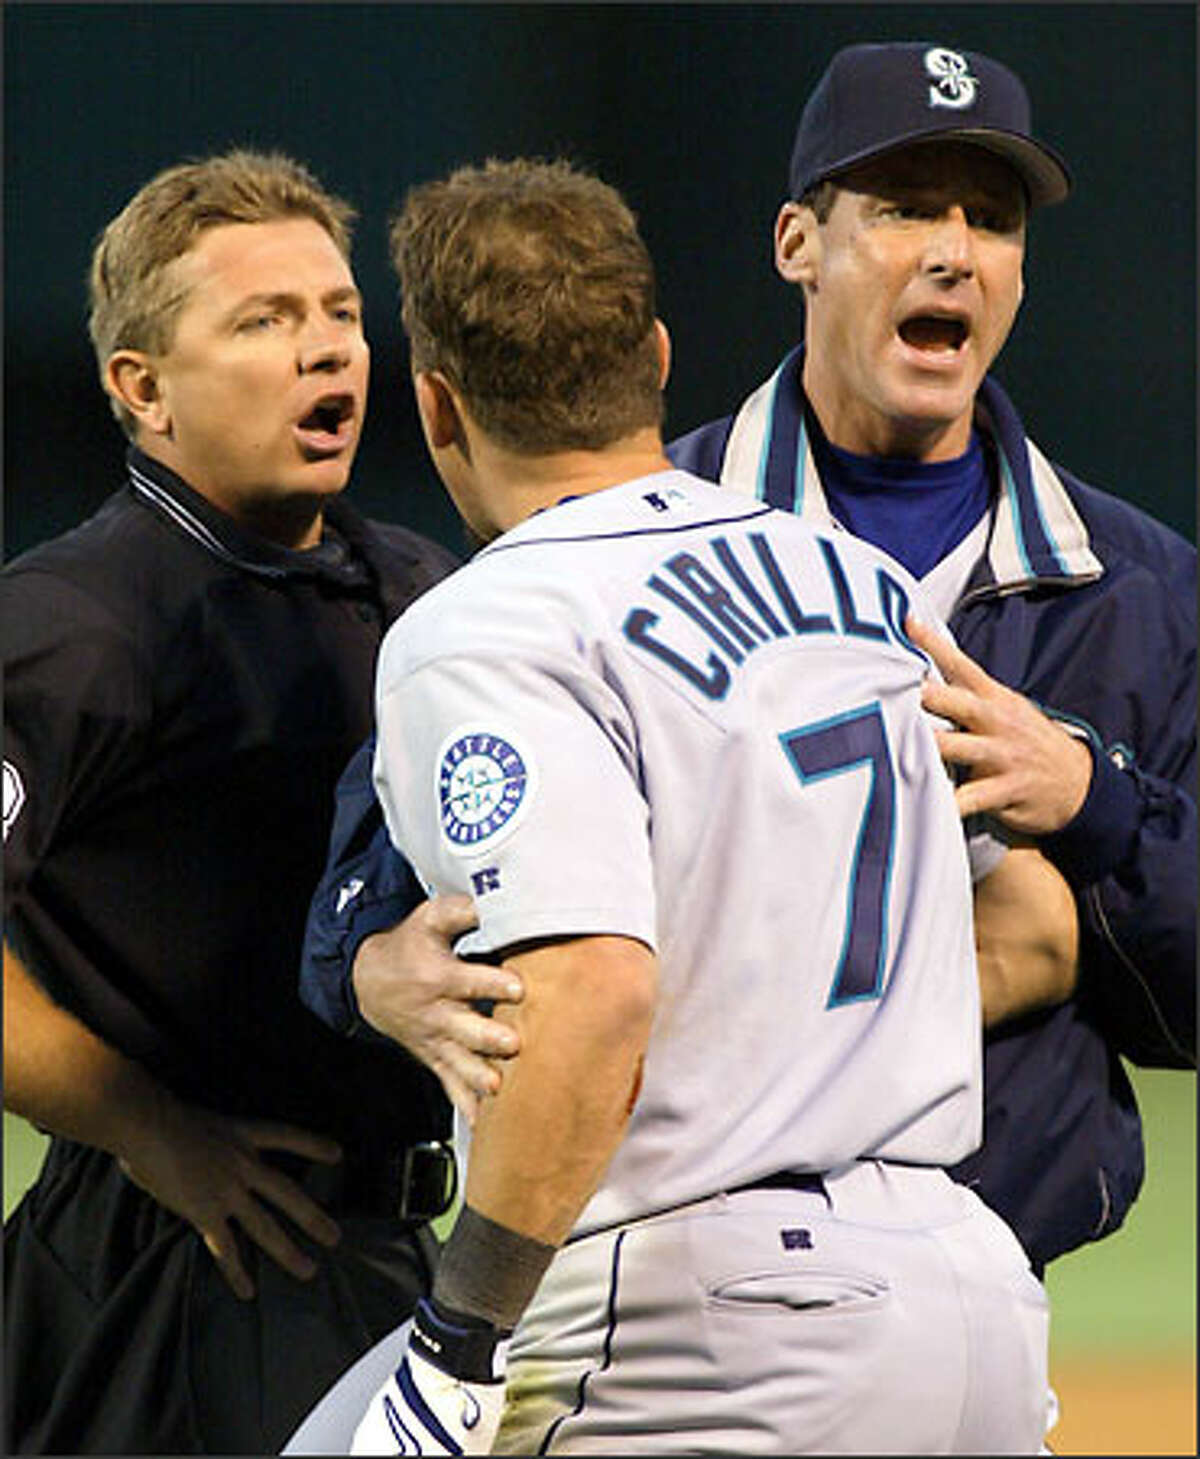 Manager Bob Melvin fails to prevent Jeff Cirillo from being ejected by home plate umpire Greg Gibson.